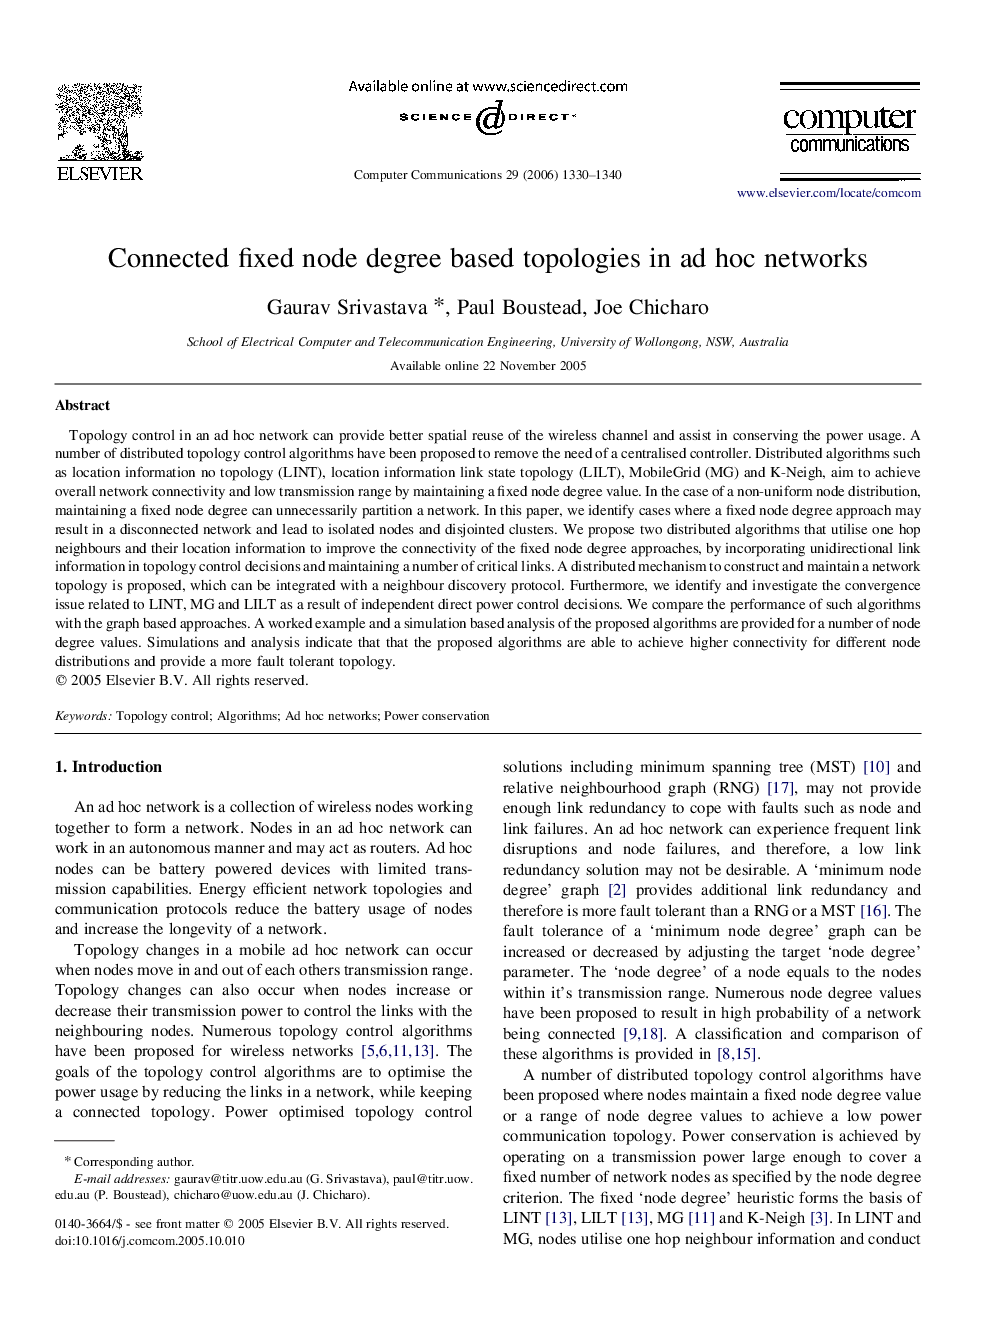 Connected fixed node degree based topologies in ad hoc networks